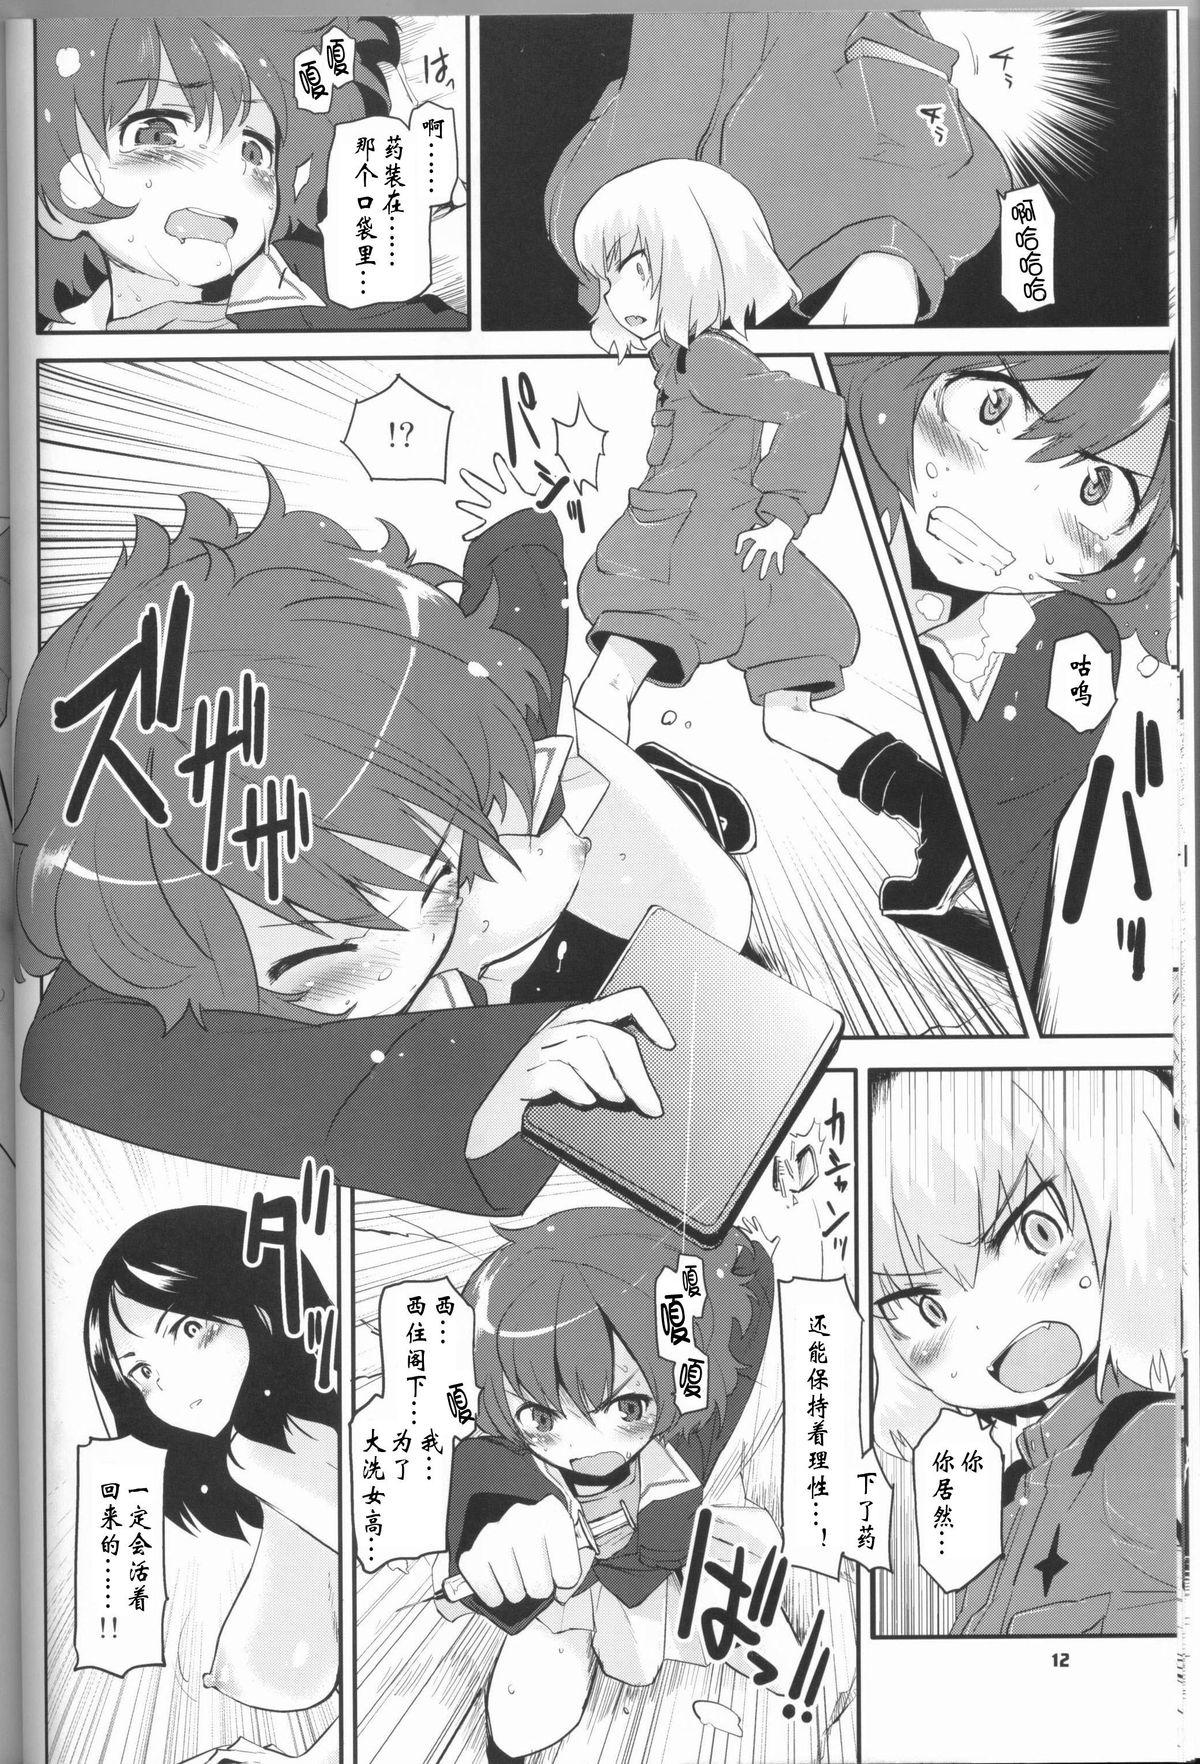 Van The General Frost Has Come! - Girls und panzer Best Blowjob - Page 11